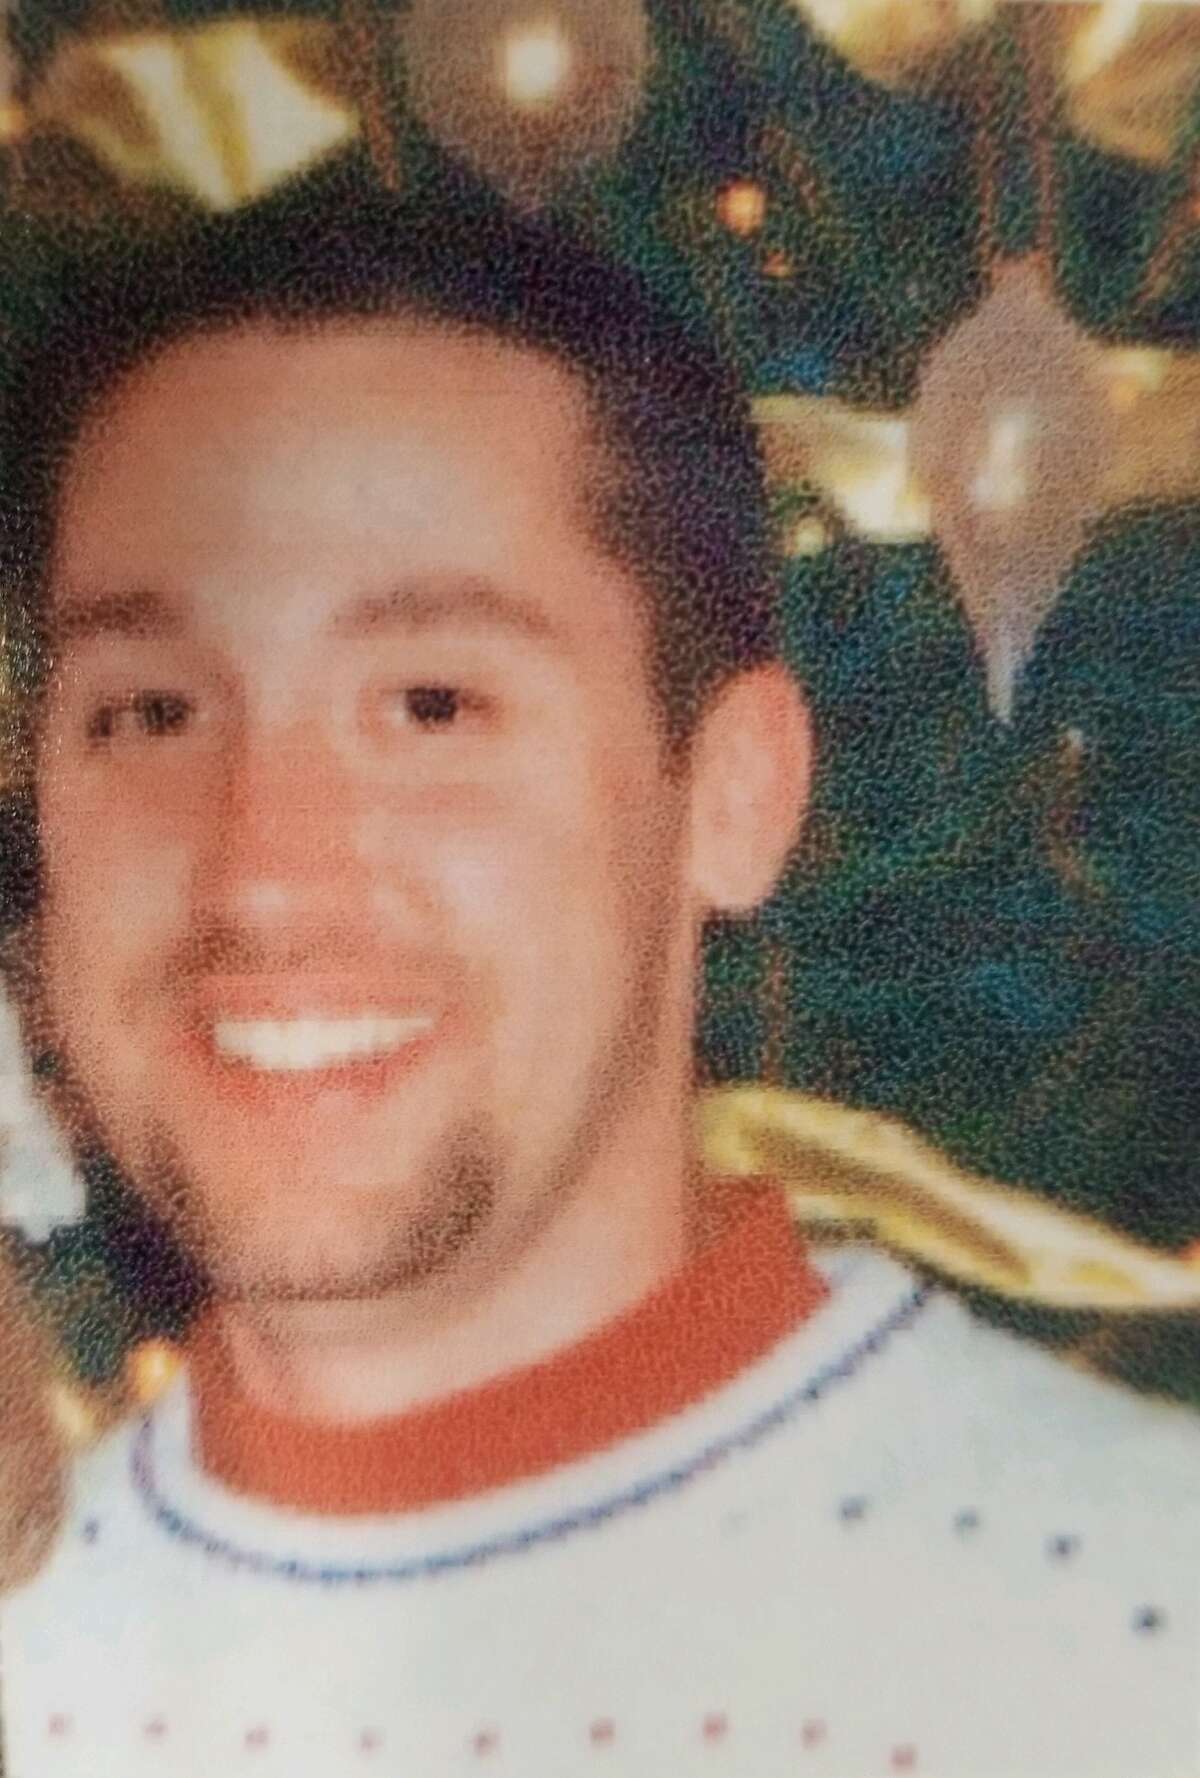 State Police say they hope the public can help them find the driver who hit and killed Brian Galusha, 28, on July 24, 2004 on a rural road in the town of Charleston.